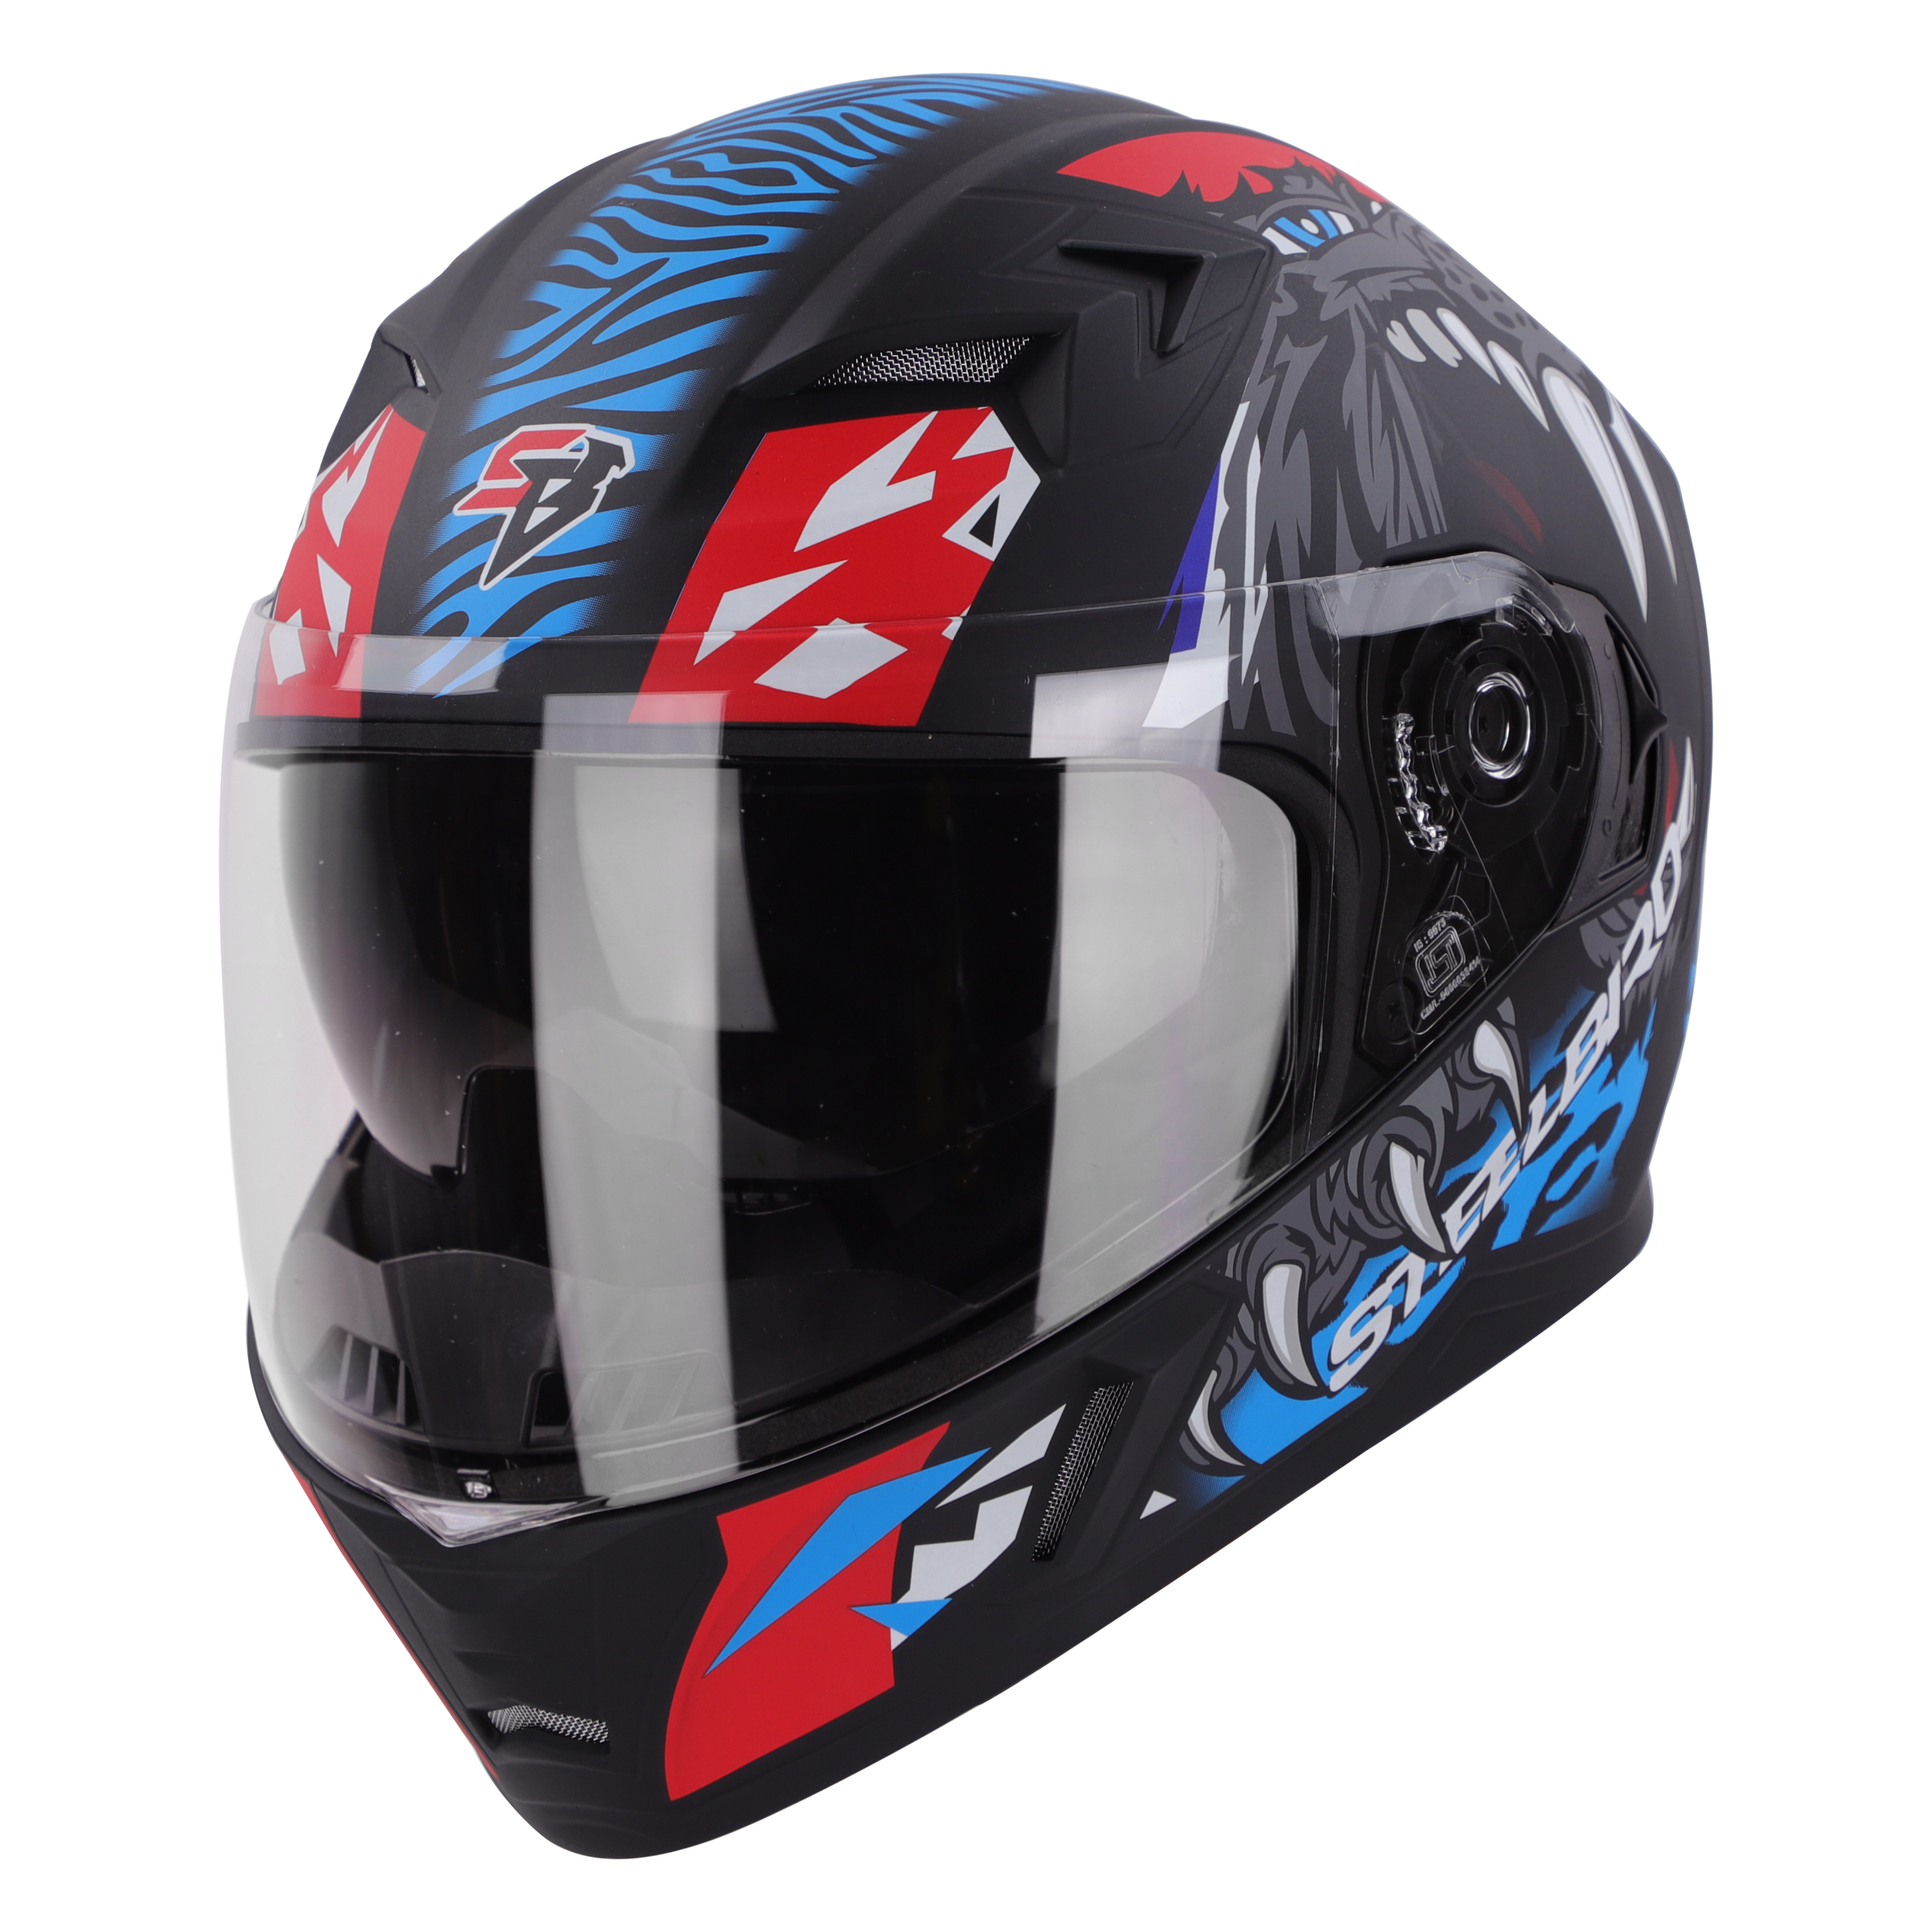 SBA-21 PANTHA GLOSSY BLACK WITH RED/BLUE (WITH INNER SUN SHIELD & LONG CHEEK PAD INTERIOR)